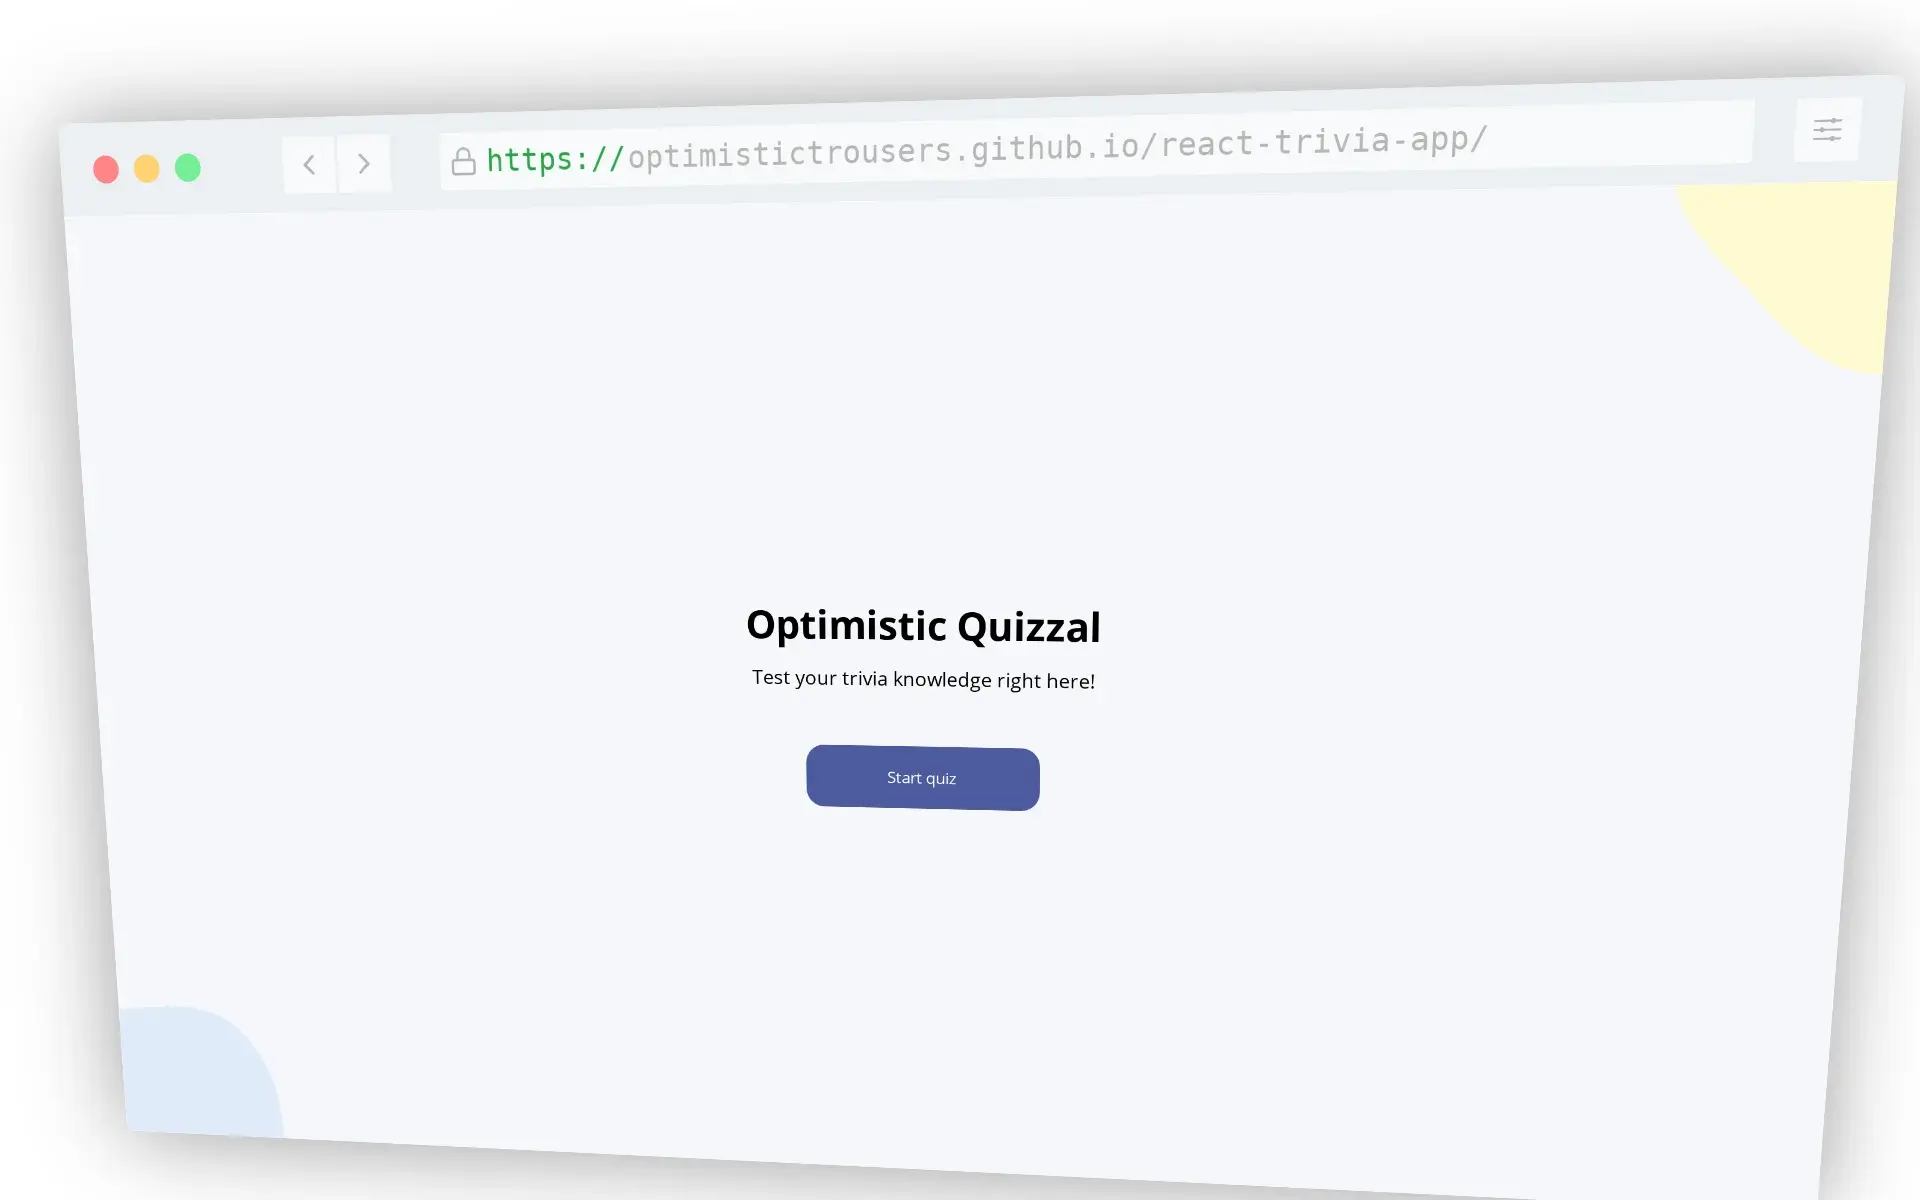 Landing page of 'Optimistic Quizzal' trivia game with a subtitle reading 'Test your trivia knowledge right here!' and a button labeled 'Start quiz'.